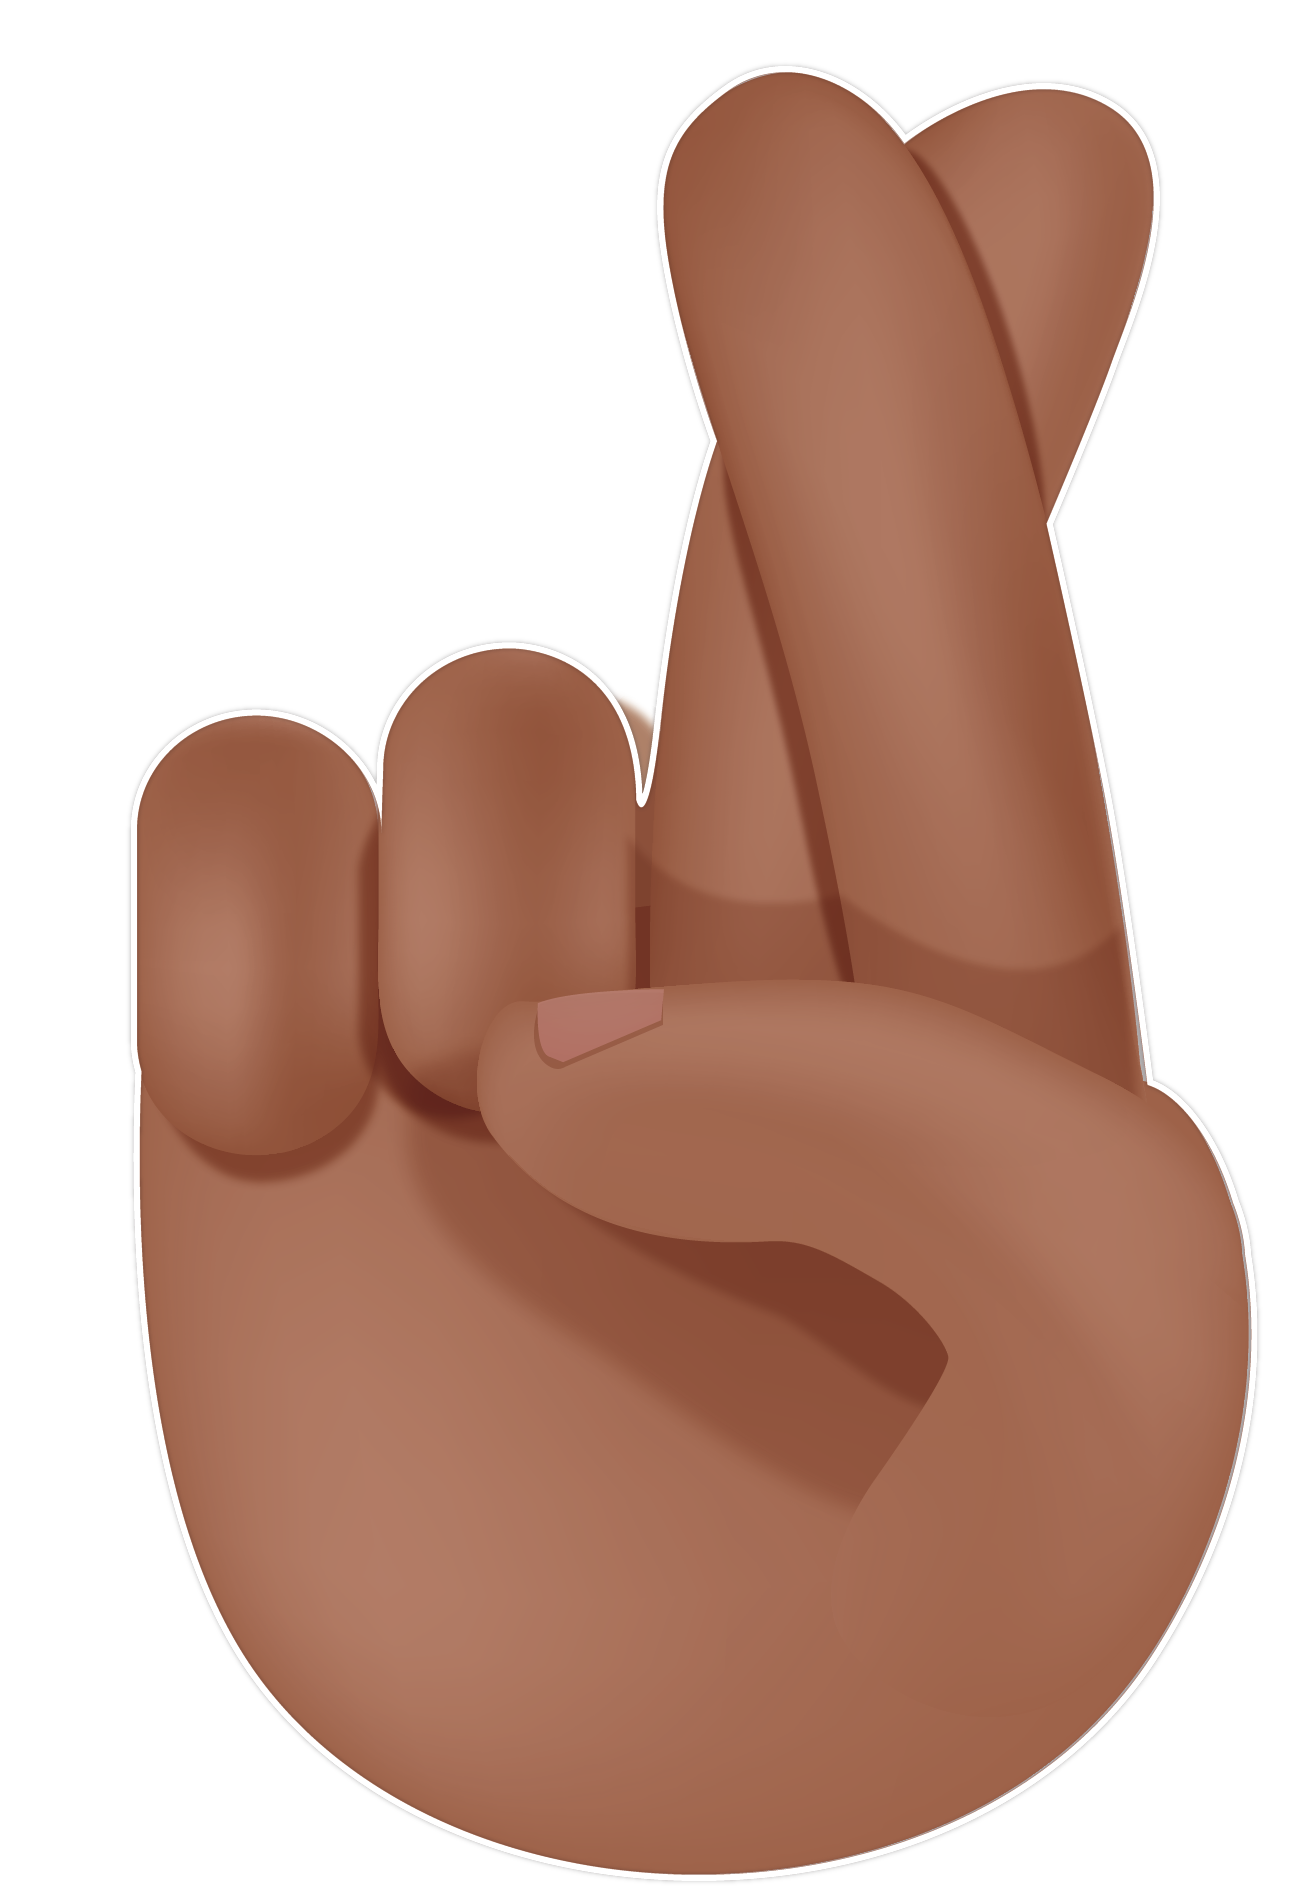 fingers clipart hand template